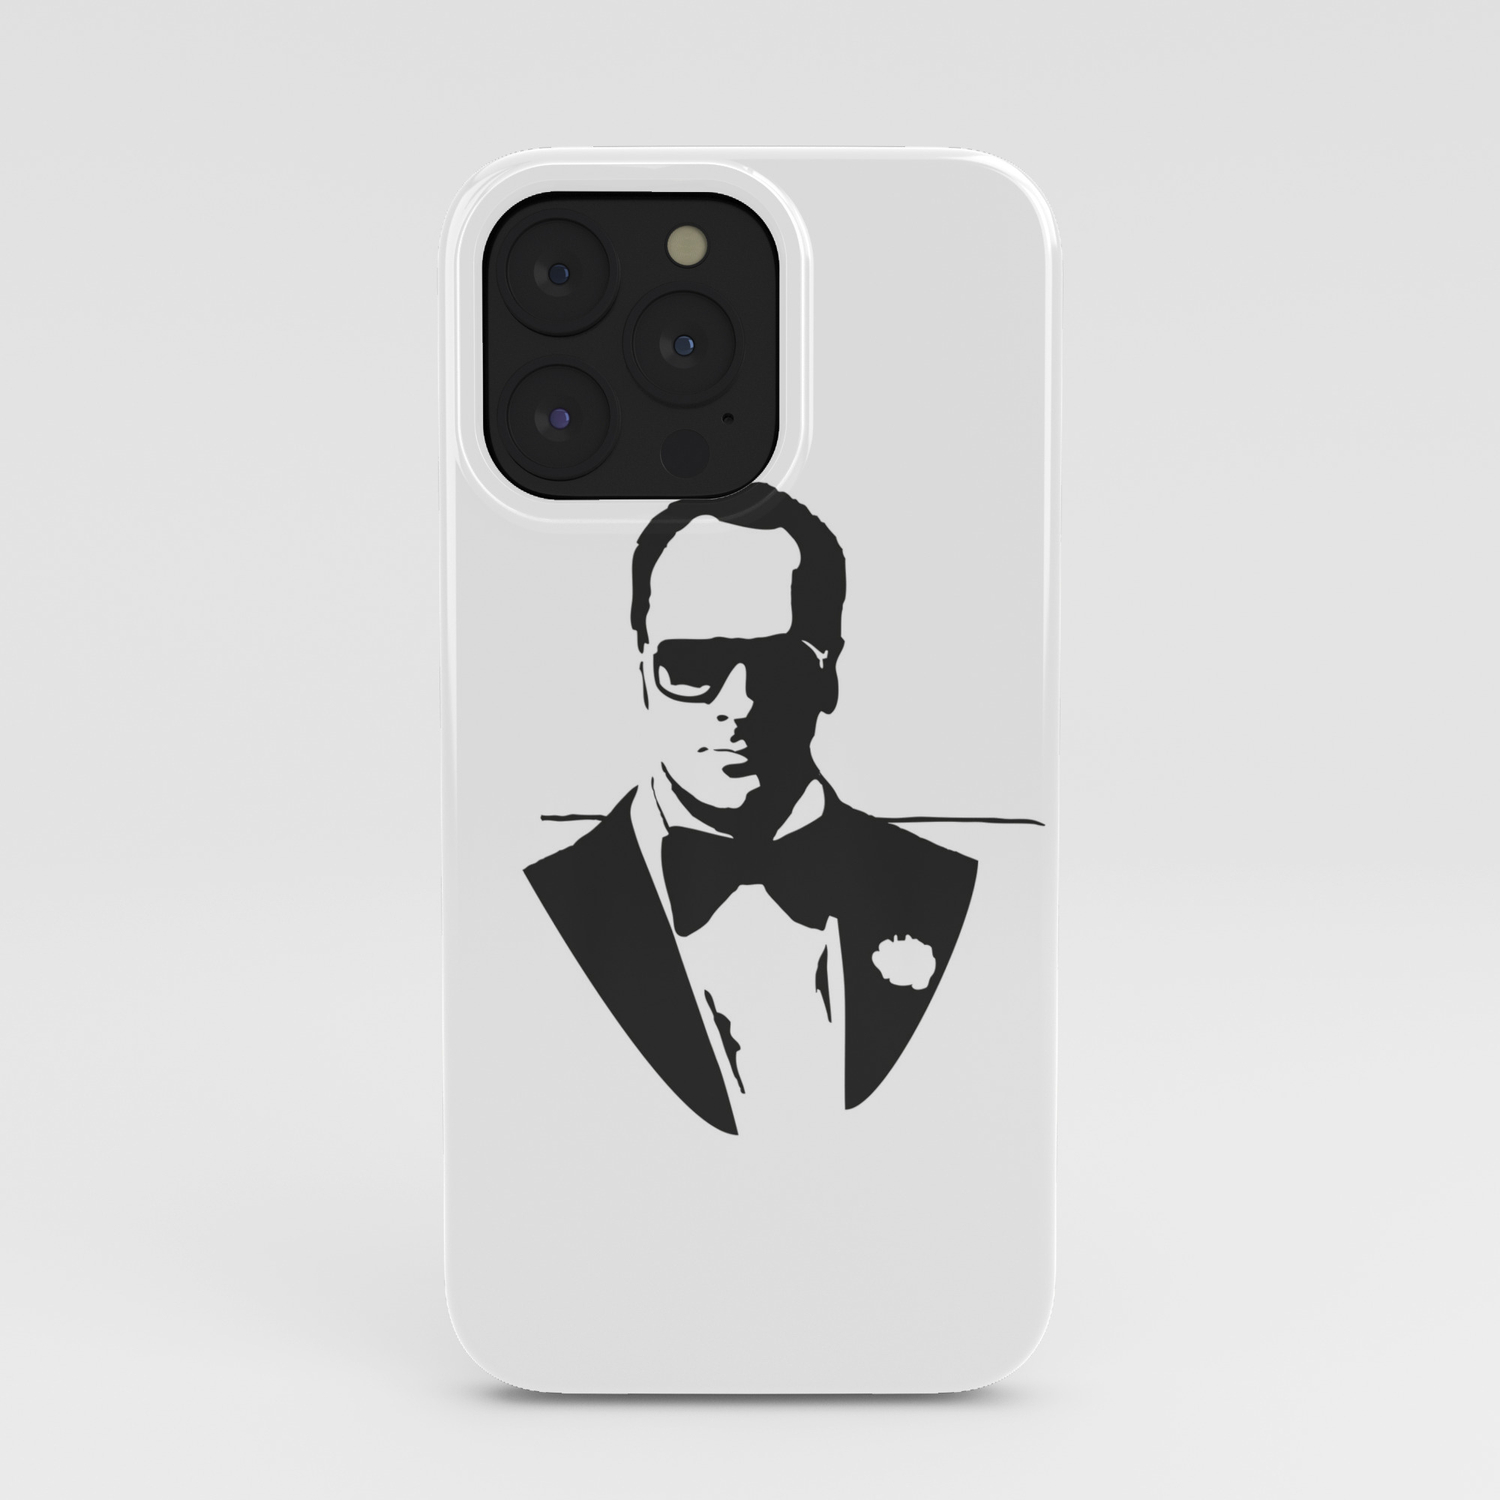 Tom Ford iPhone Case by Joannes | Society6